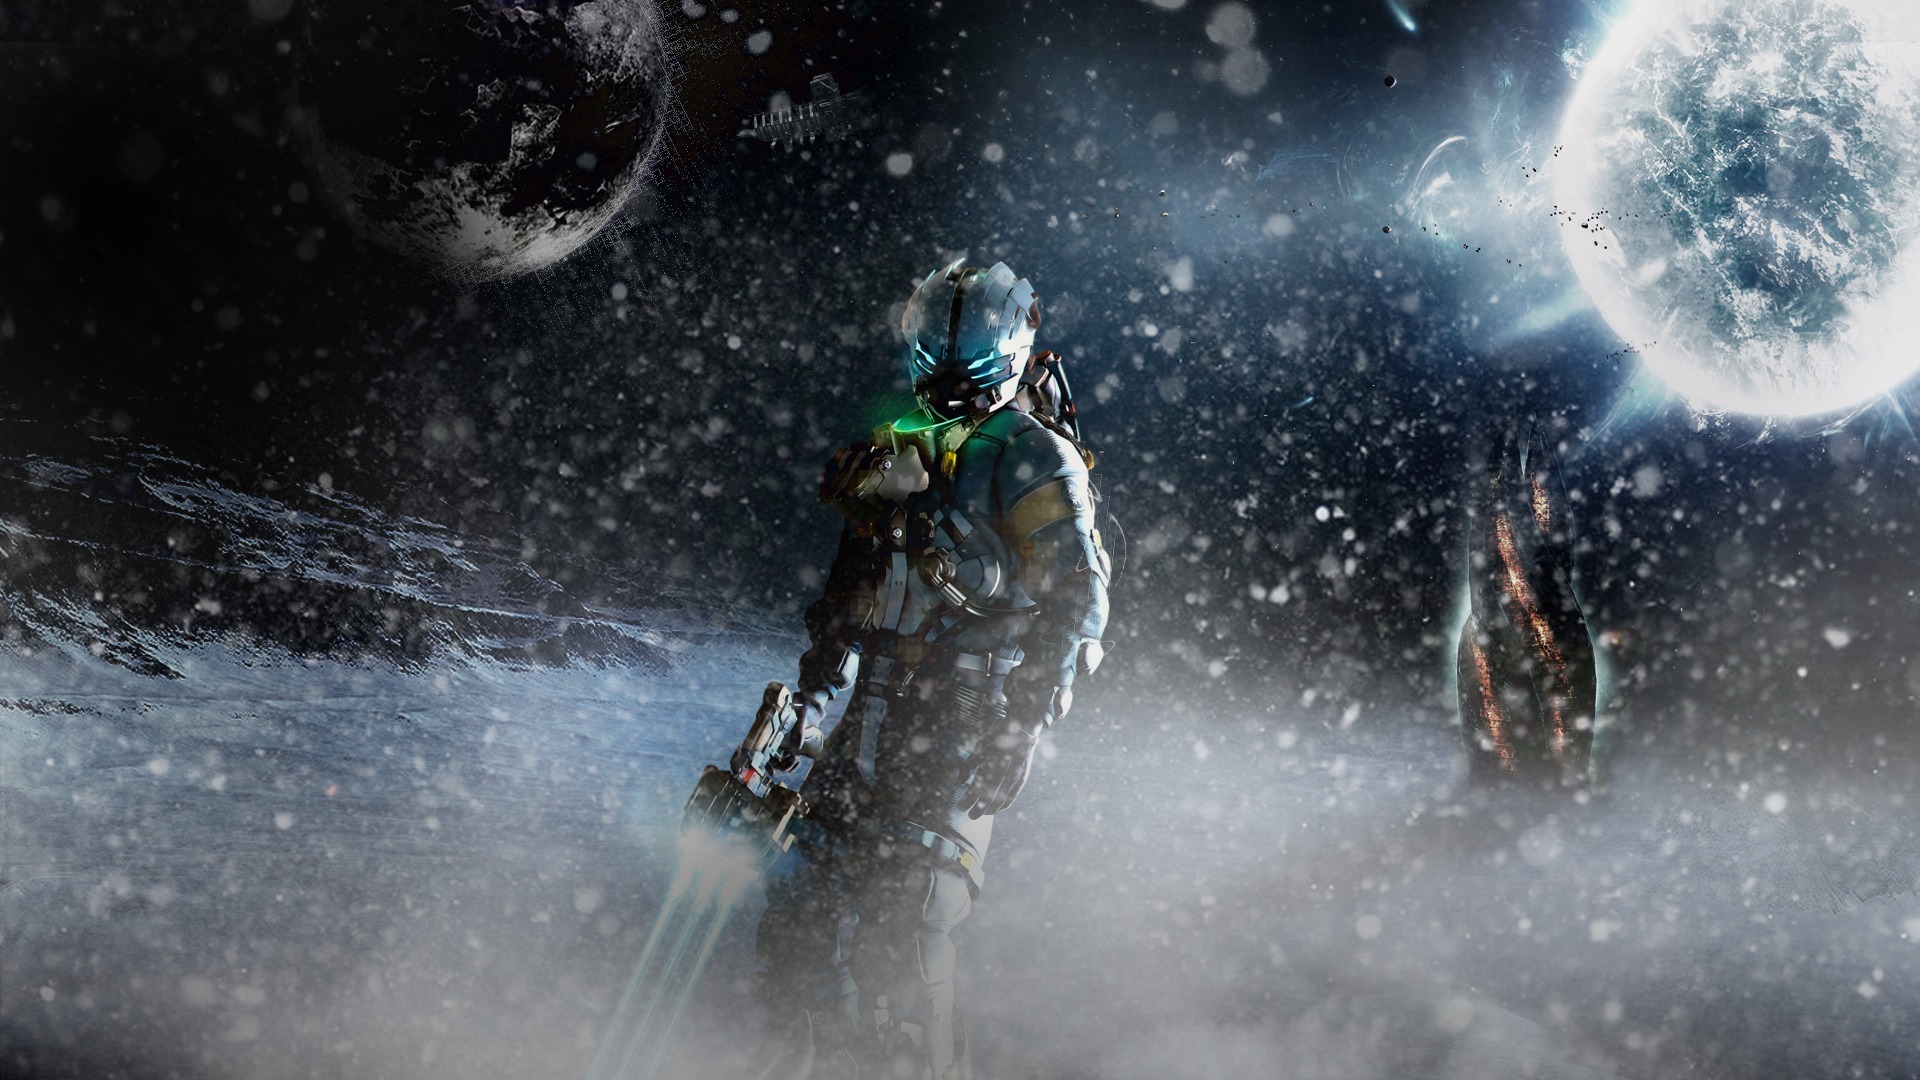 Dead Space 3 HD Wallpaper Background Image 1920x1080 ID